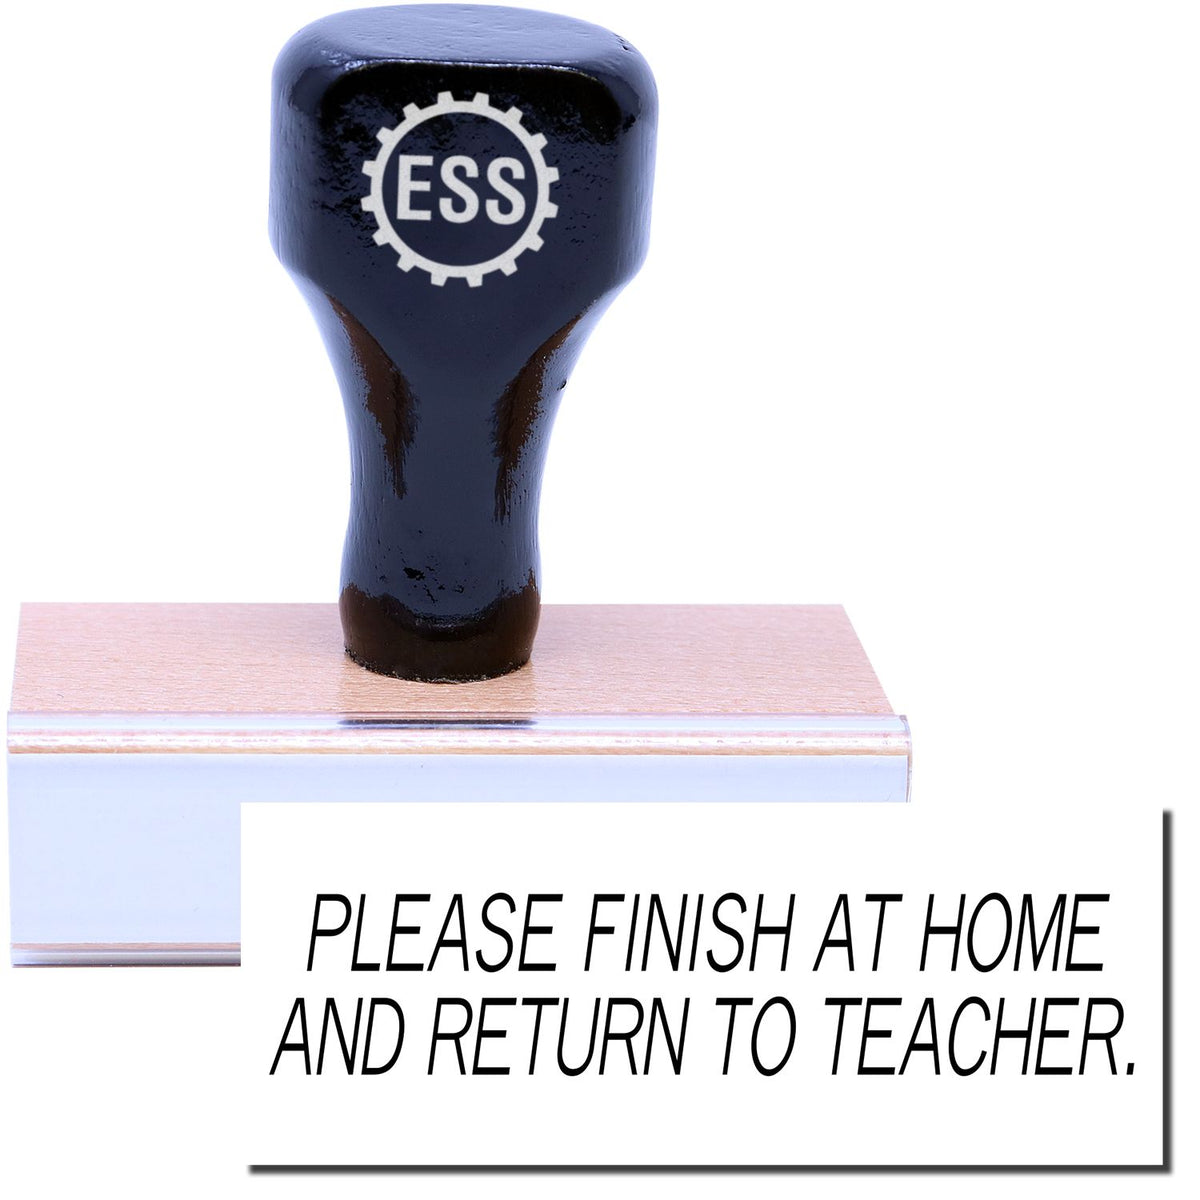 A stock office rubber stamp with a stamped image showing how the text &quot;PLEASE FINISH AT HOME AND RETURN TO TEACHER.&quot; in a large font is displayed after stamping.